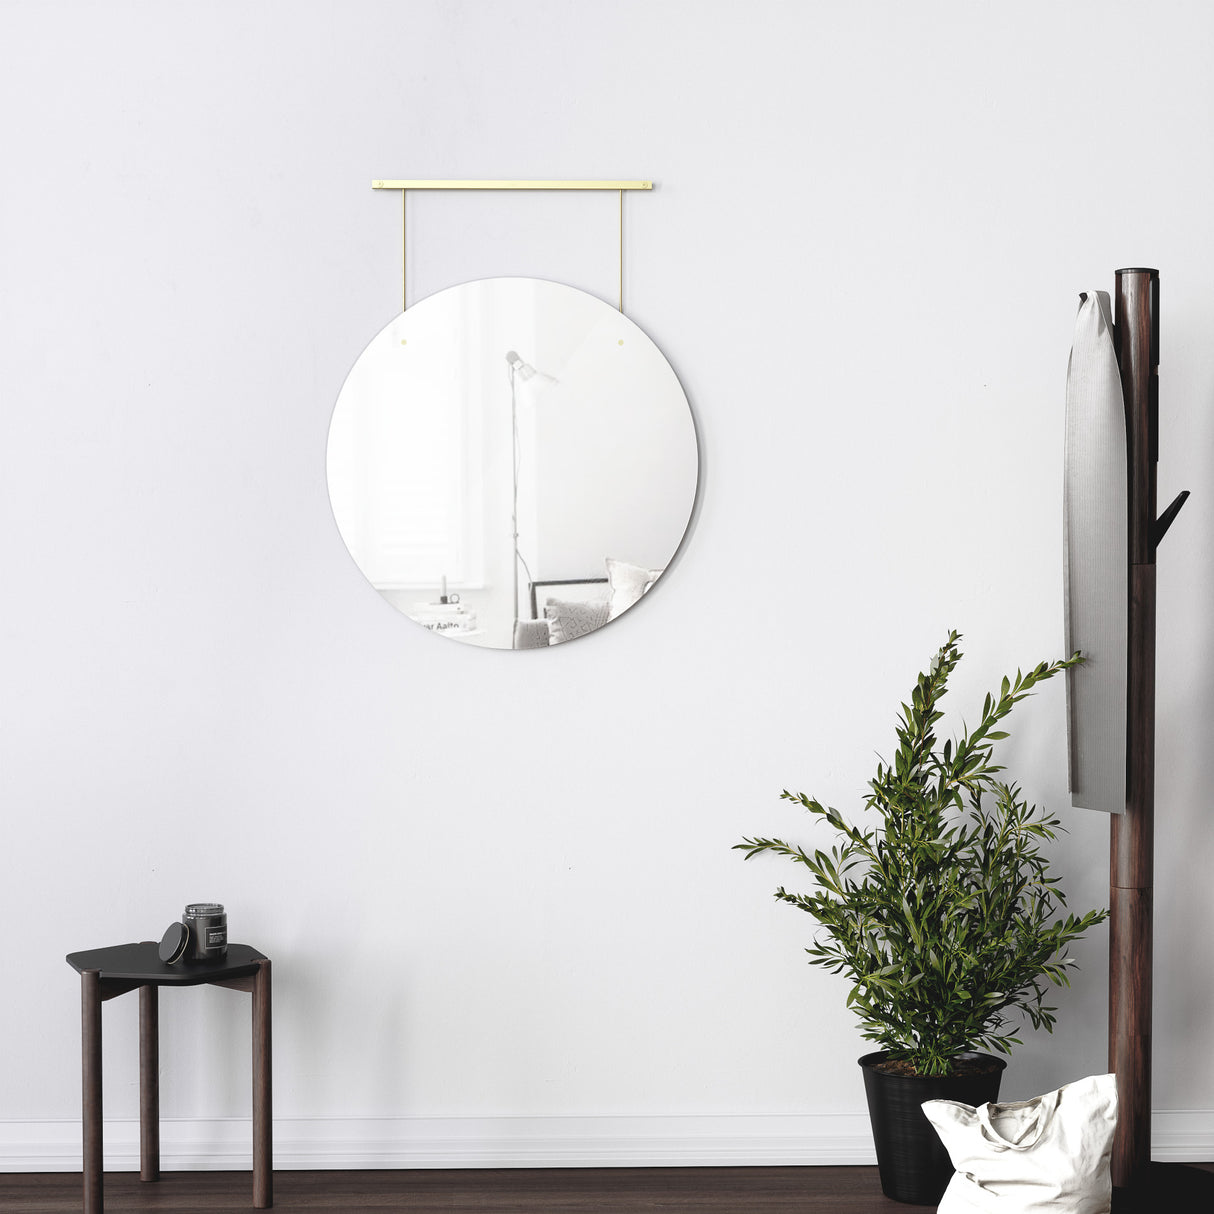 Wall Mirrors | color: Brass | https://player.vimeo.com/video/438002612